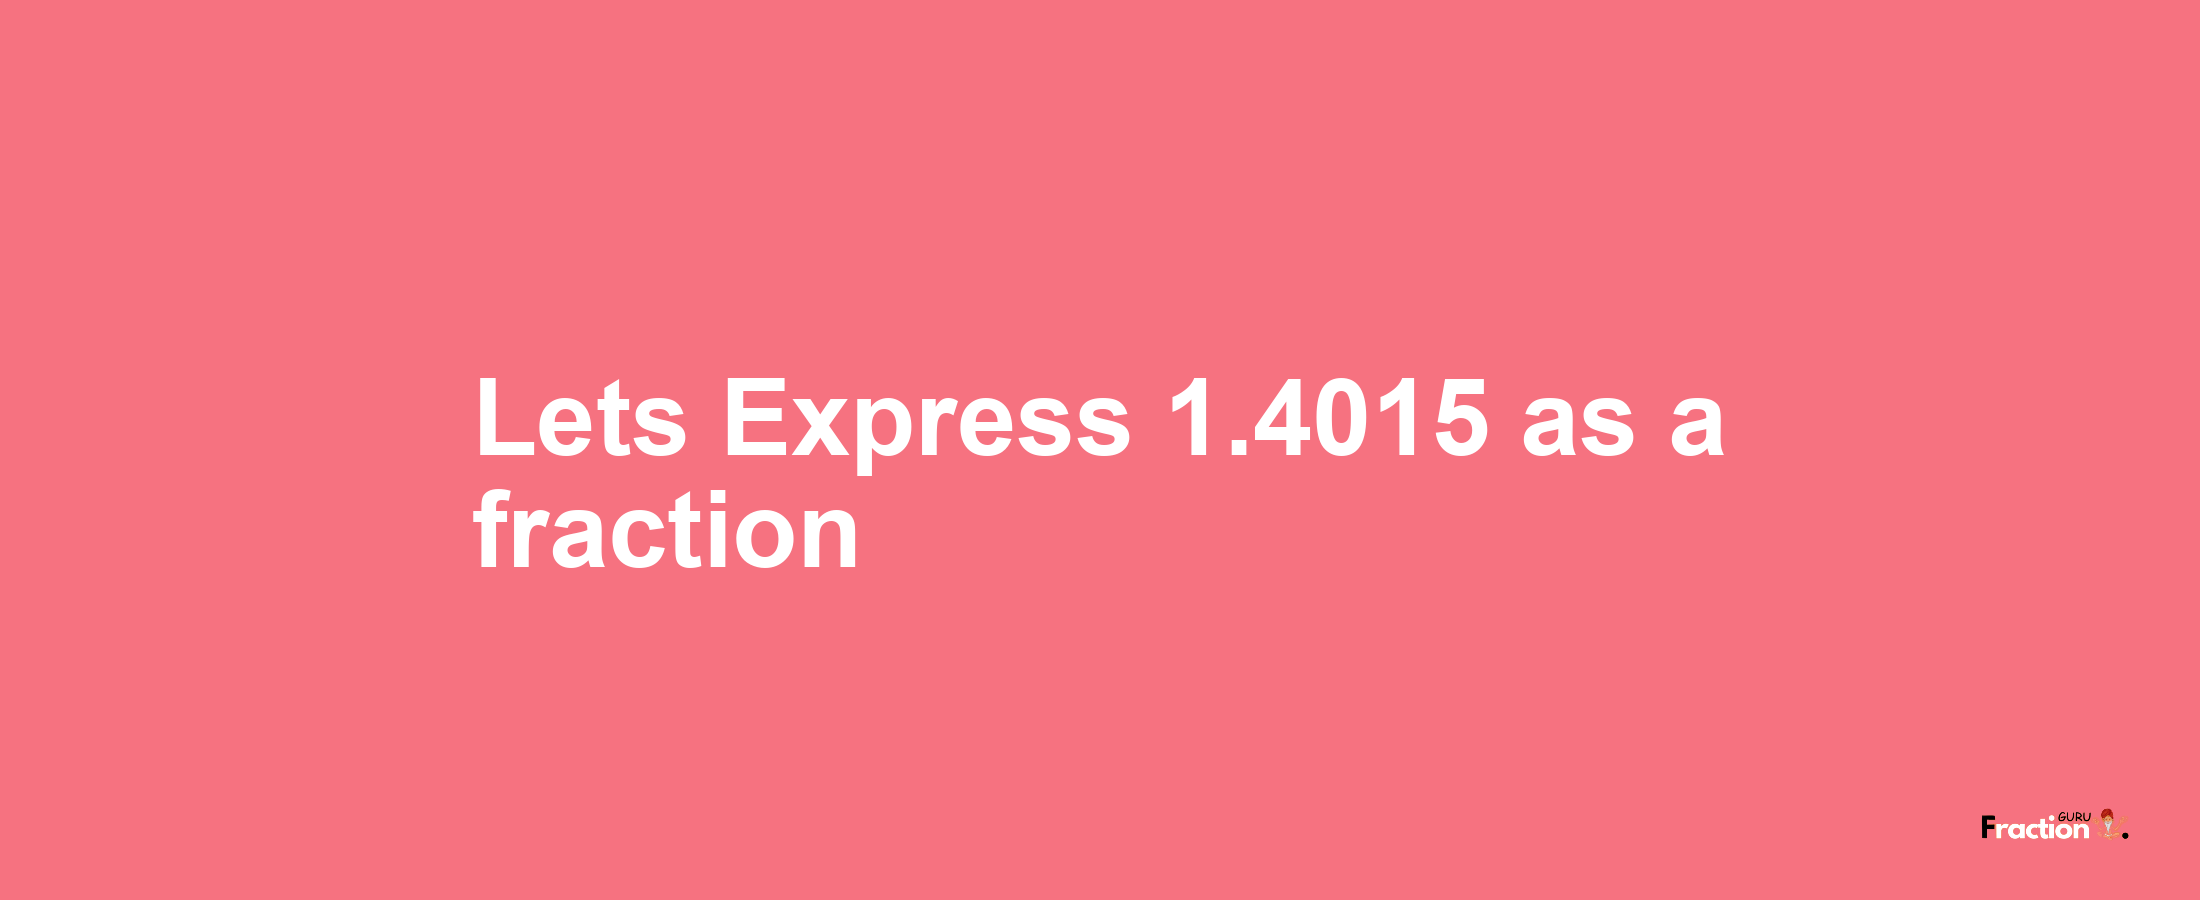 Lets Express 1.4015 as afraction